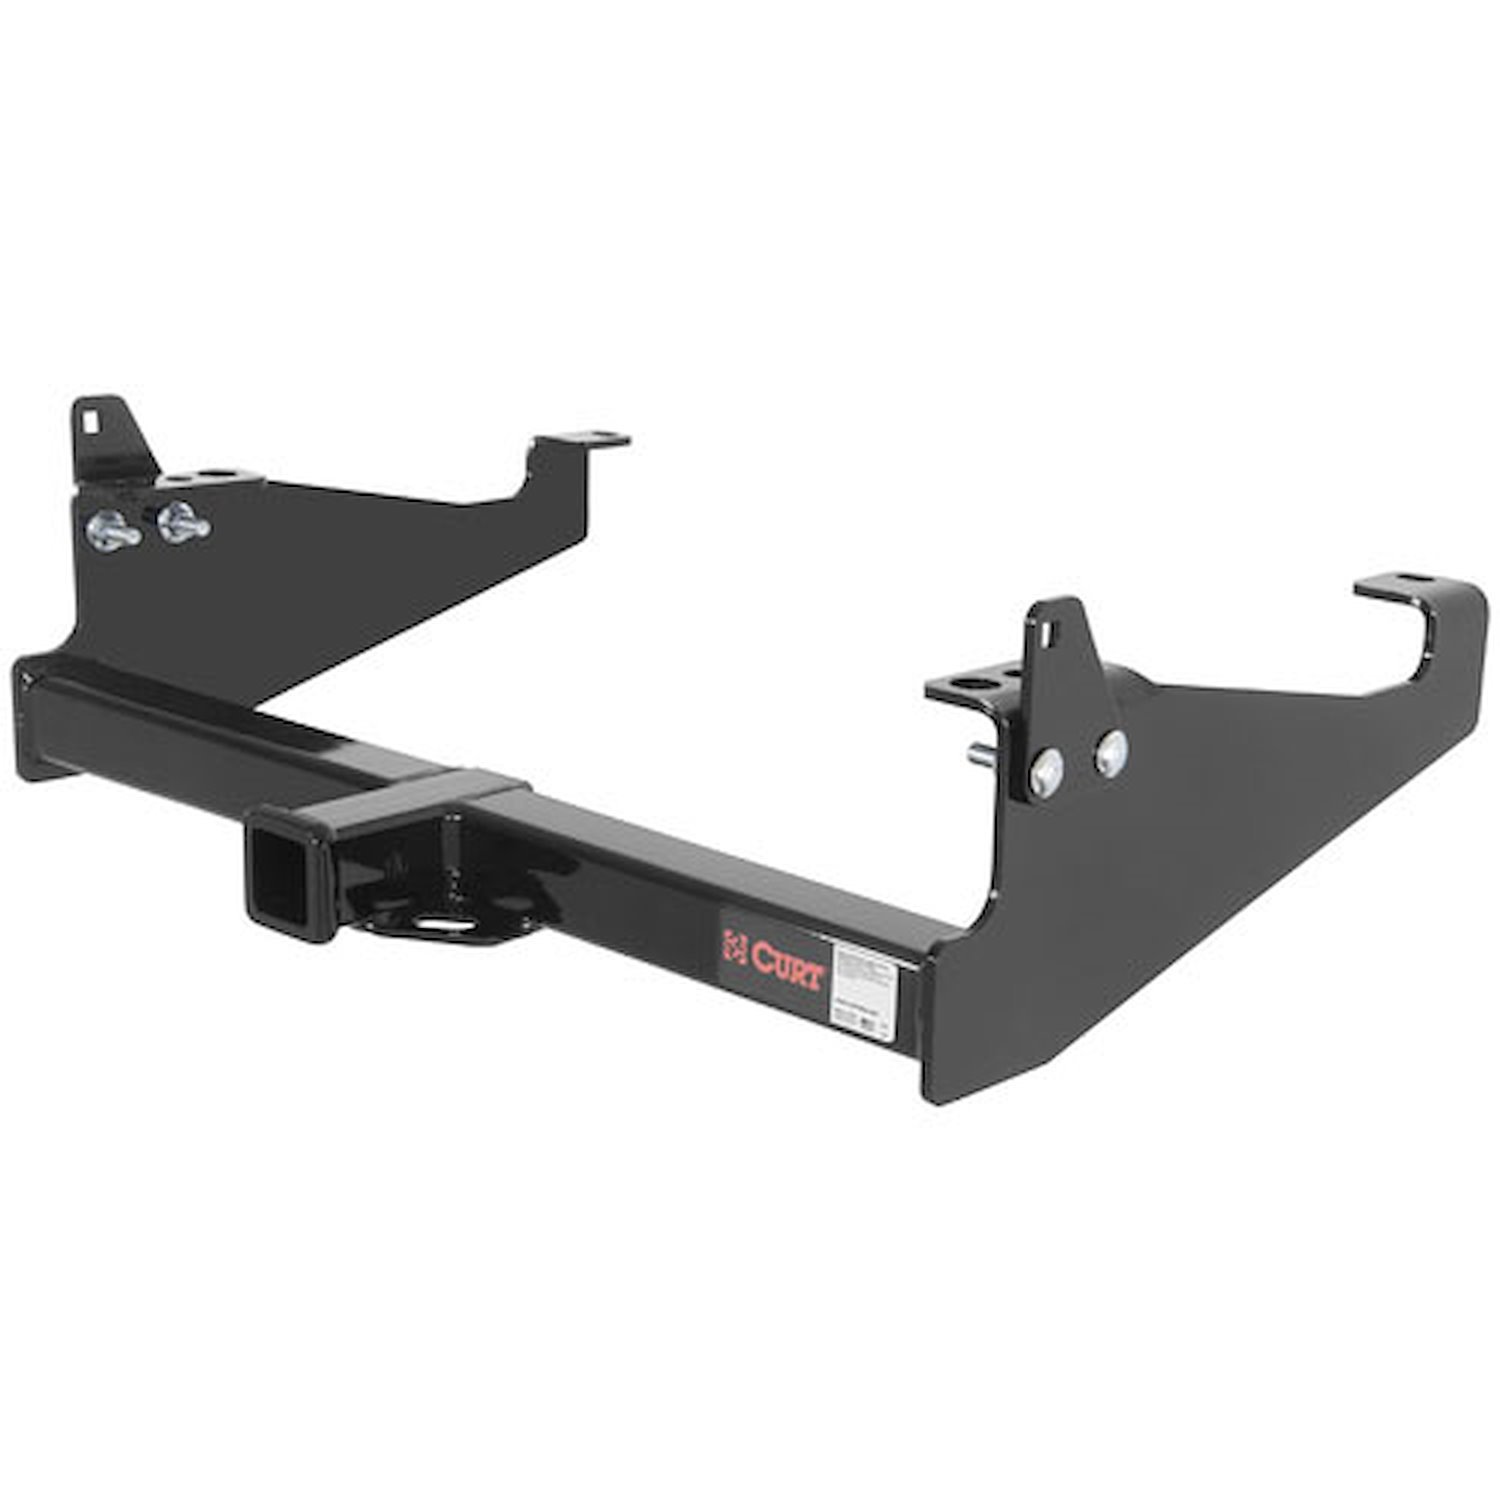 Class 4 Receiver Hitch 1999-2016 F-350/F-450/F-550 Super Duty Cab & Chassis with 34" Frame